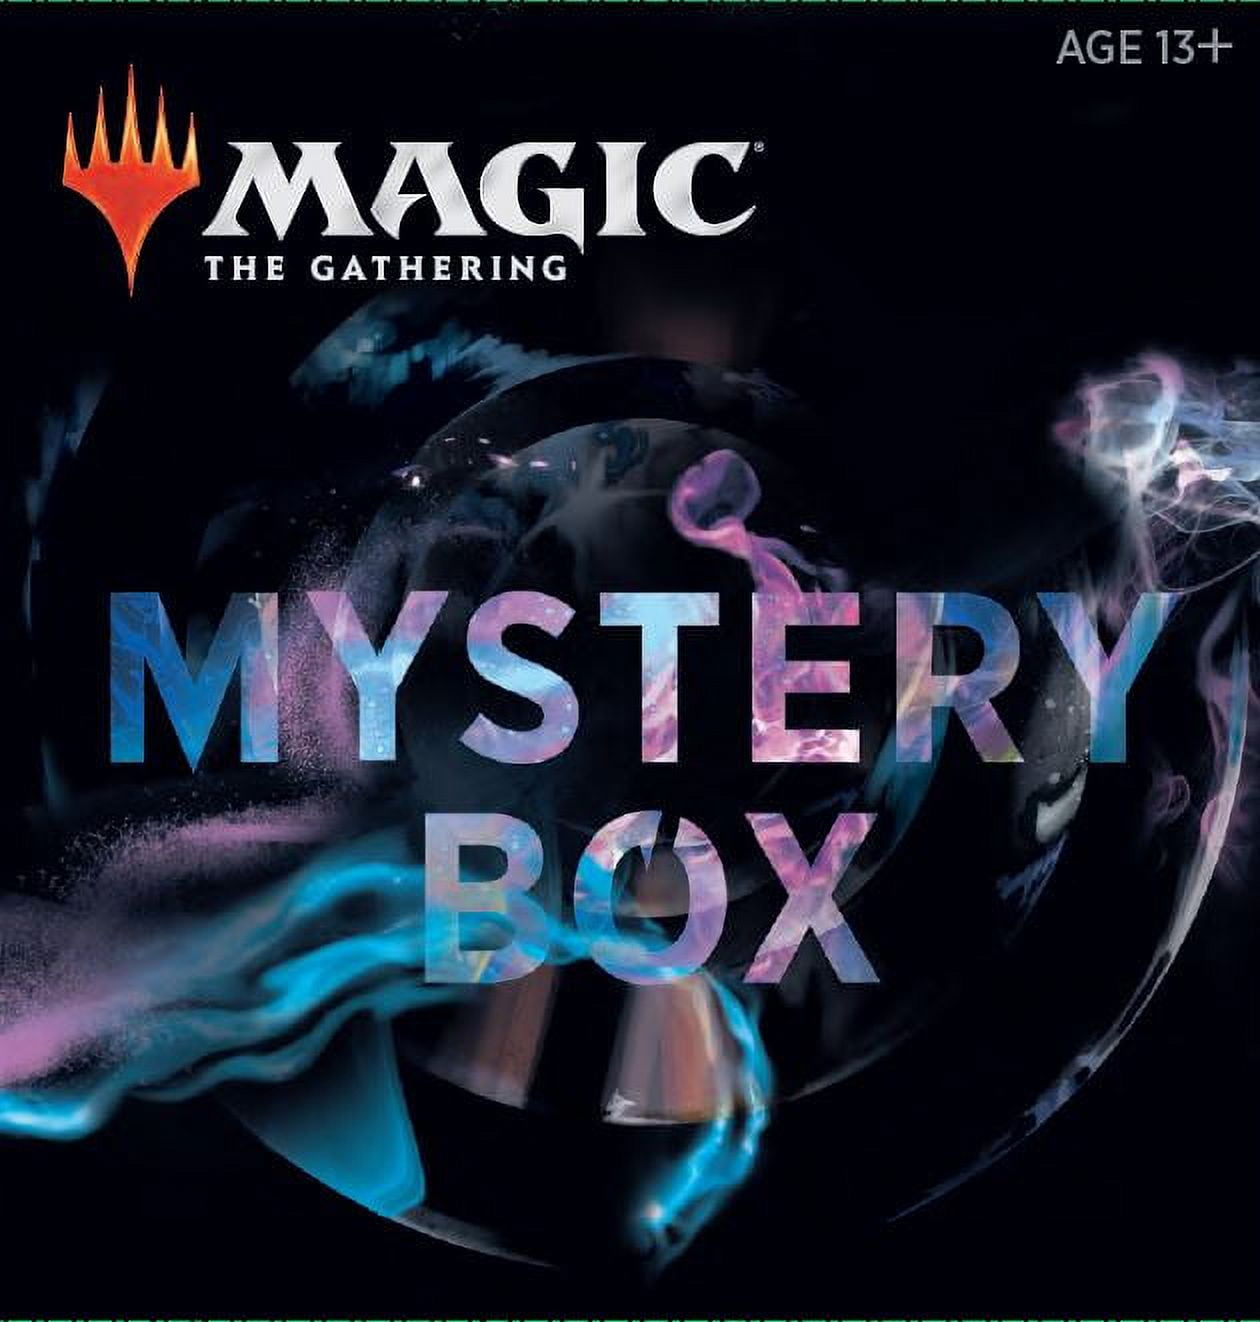 The End Games - Mystery Booster Convention Packs! Just a little taste of the  craziness. #teglife #mtg #mtgaddicts